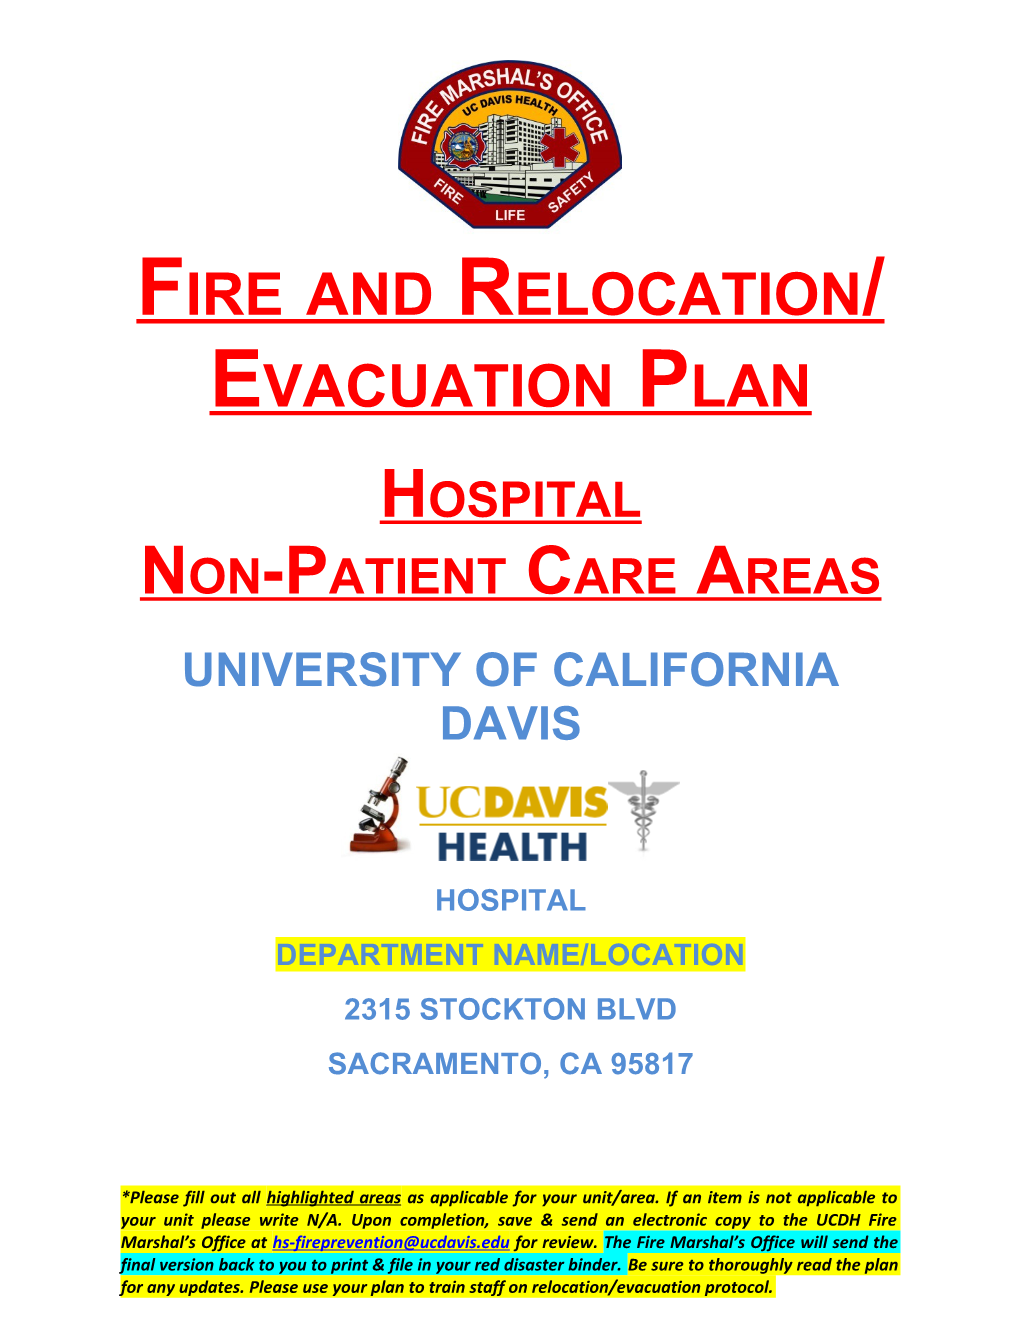 Fire and Evacuation Plan